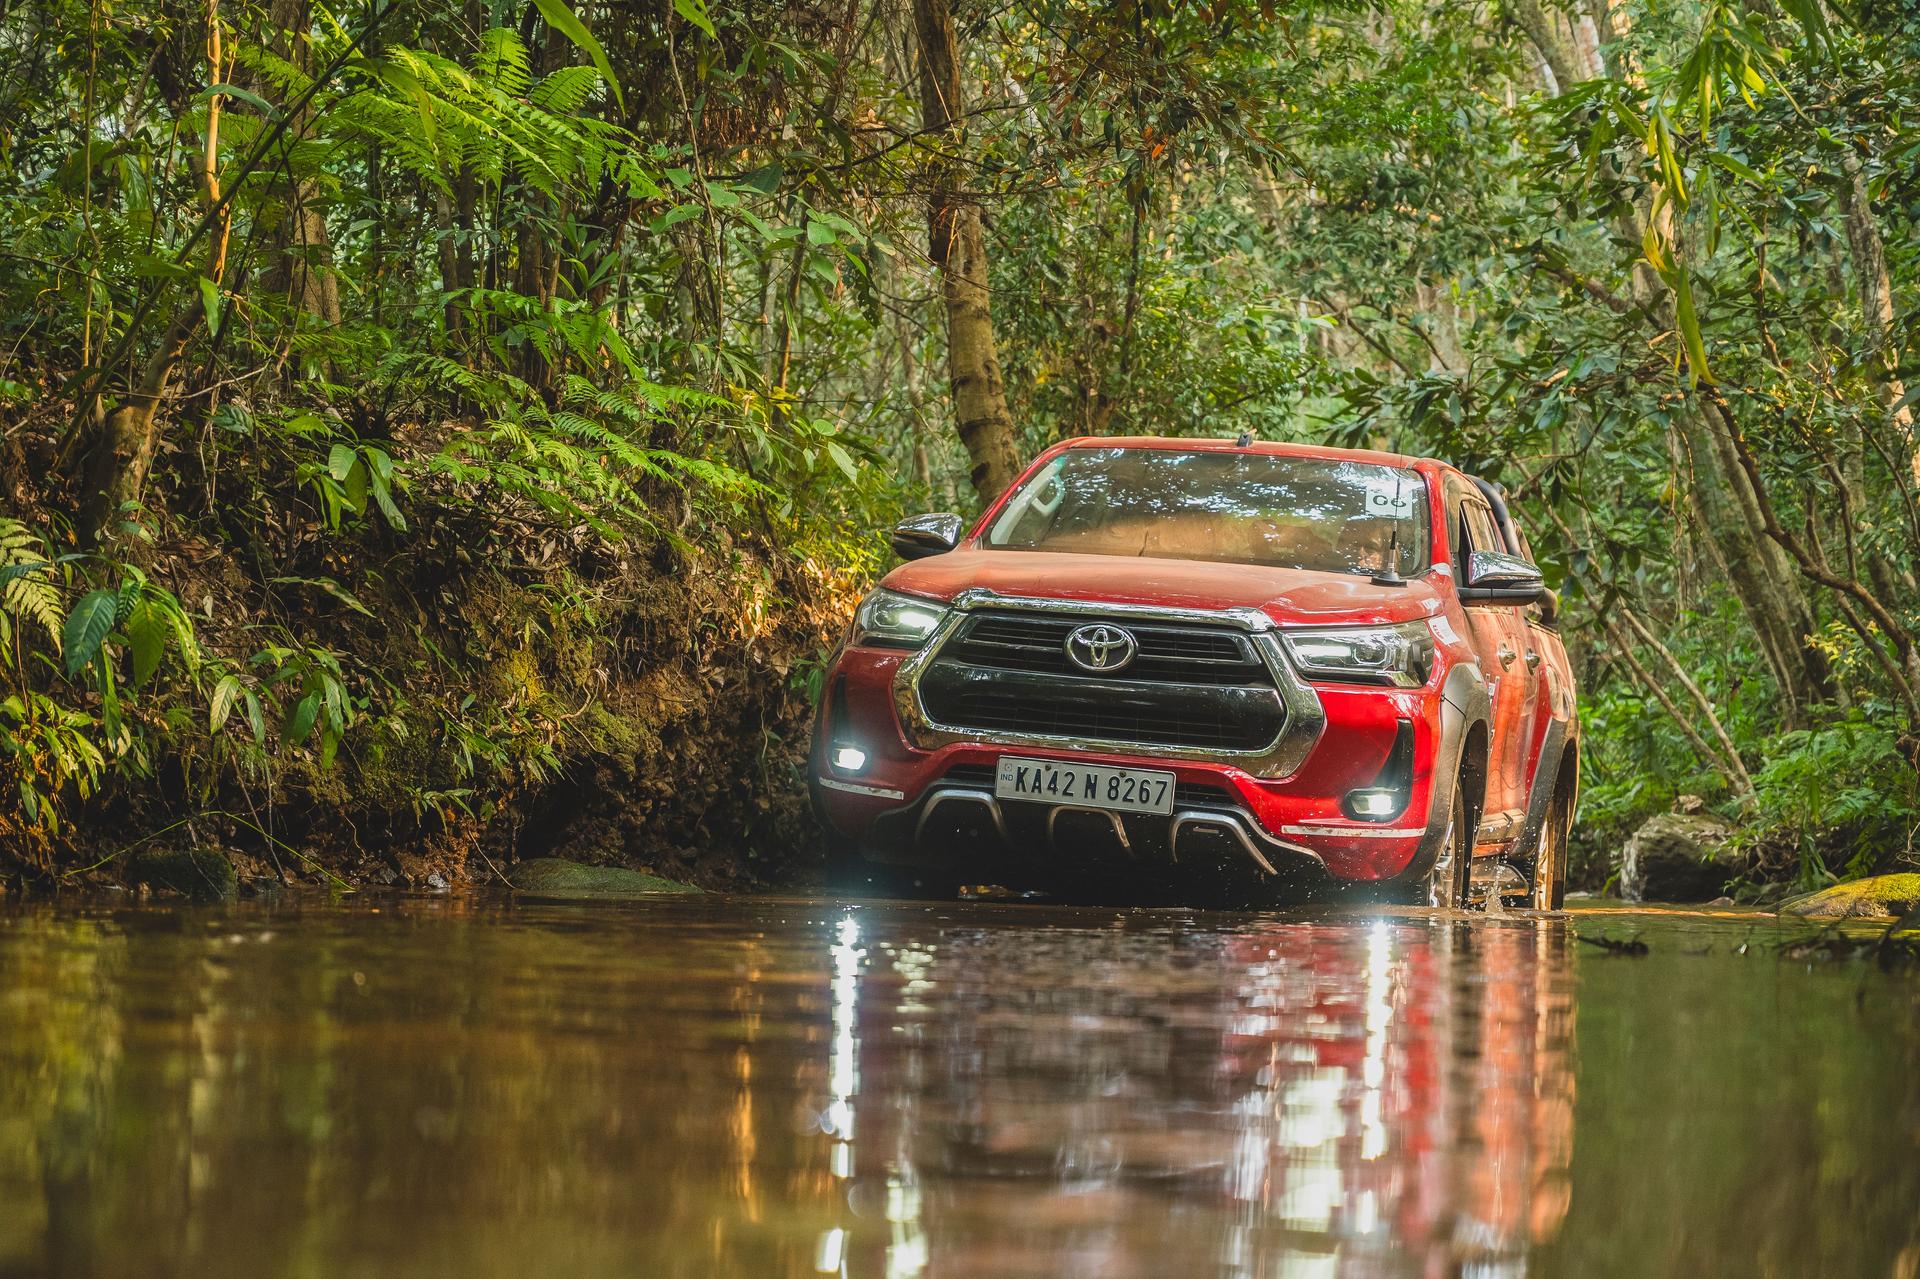 Learning The Art Of Off-Roading: Toyota Great 4x4 Expedition 